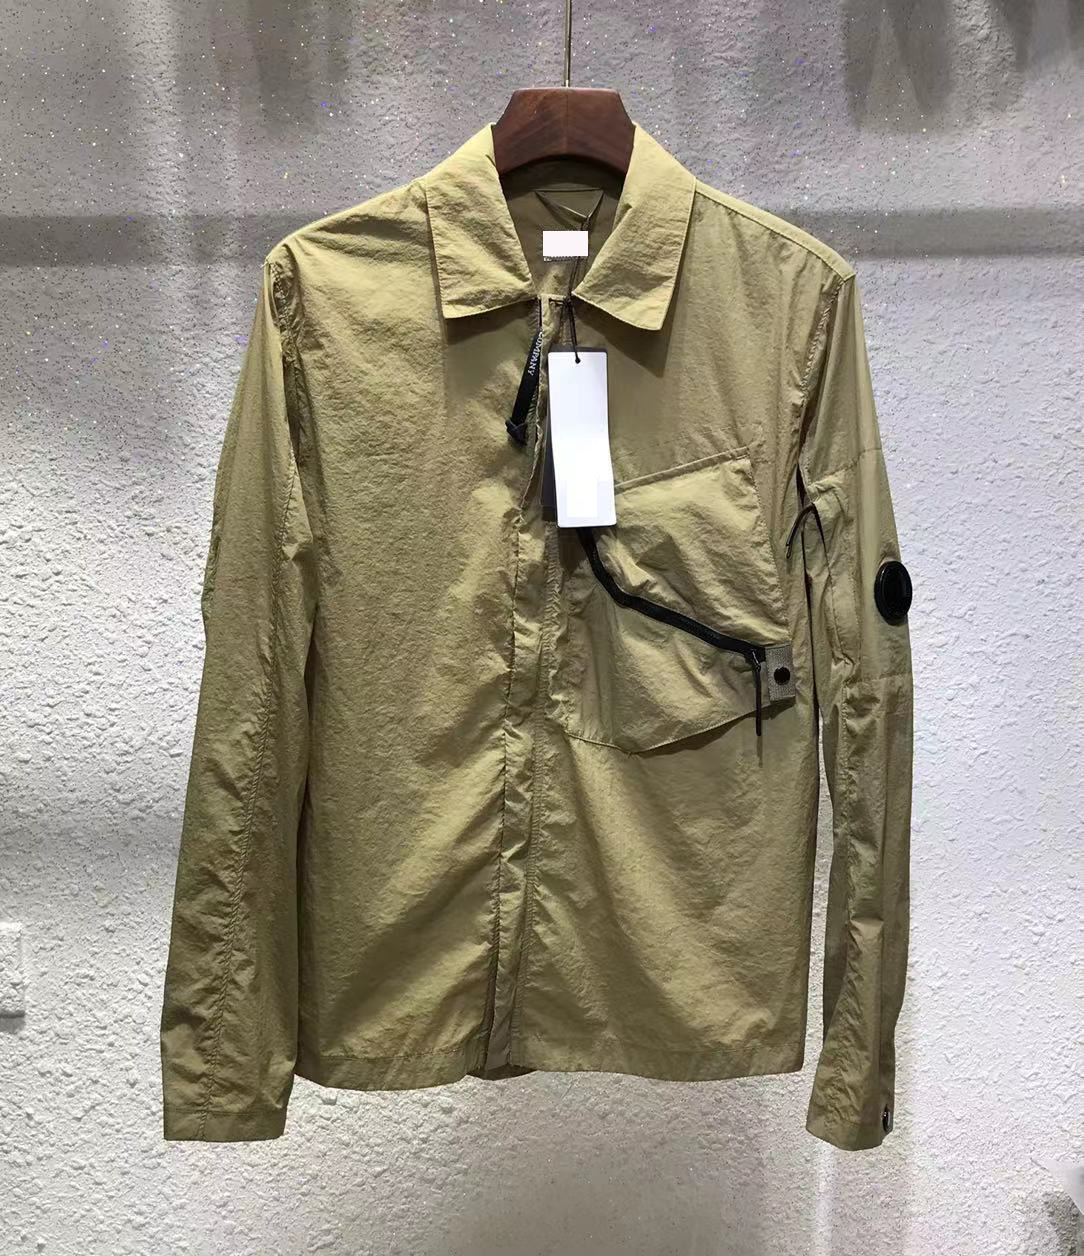 

C P topstoney konng gonng spring and summer thin jacket fashion brand islandss coat outdoor sun proof windbreaker Sunscreen clothing Waterproof STONE JACKETS, Supplement (not shipped separately)